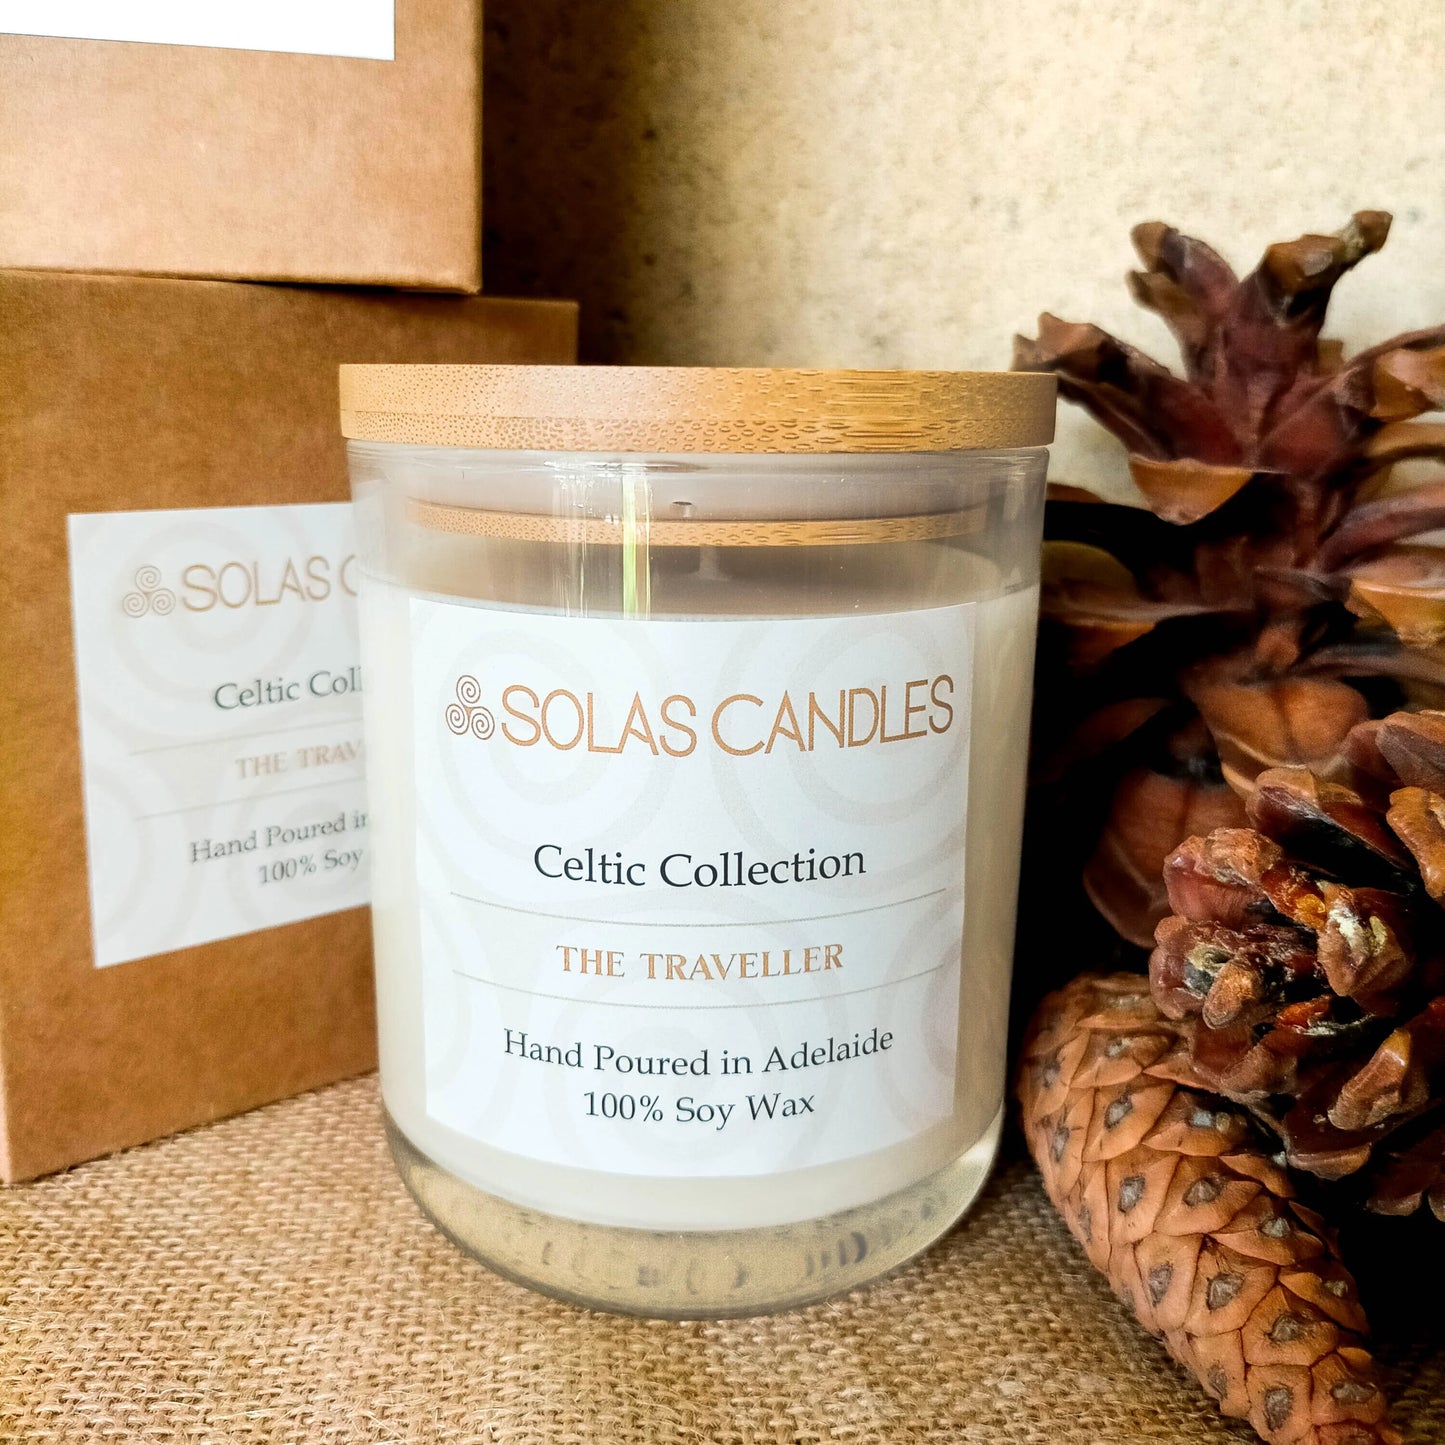 Solas Candles - Celtic Collection, The Traveller